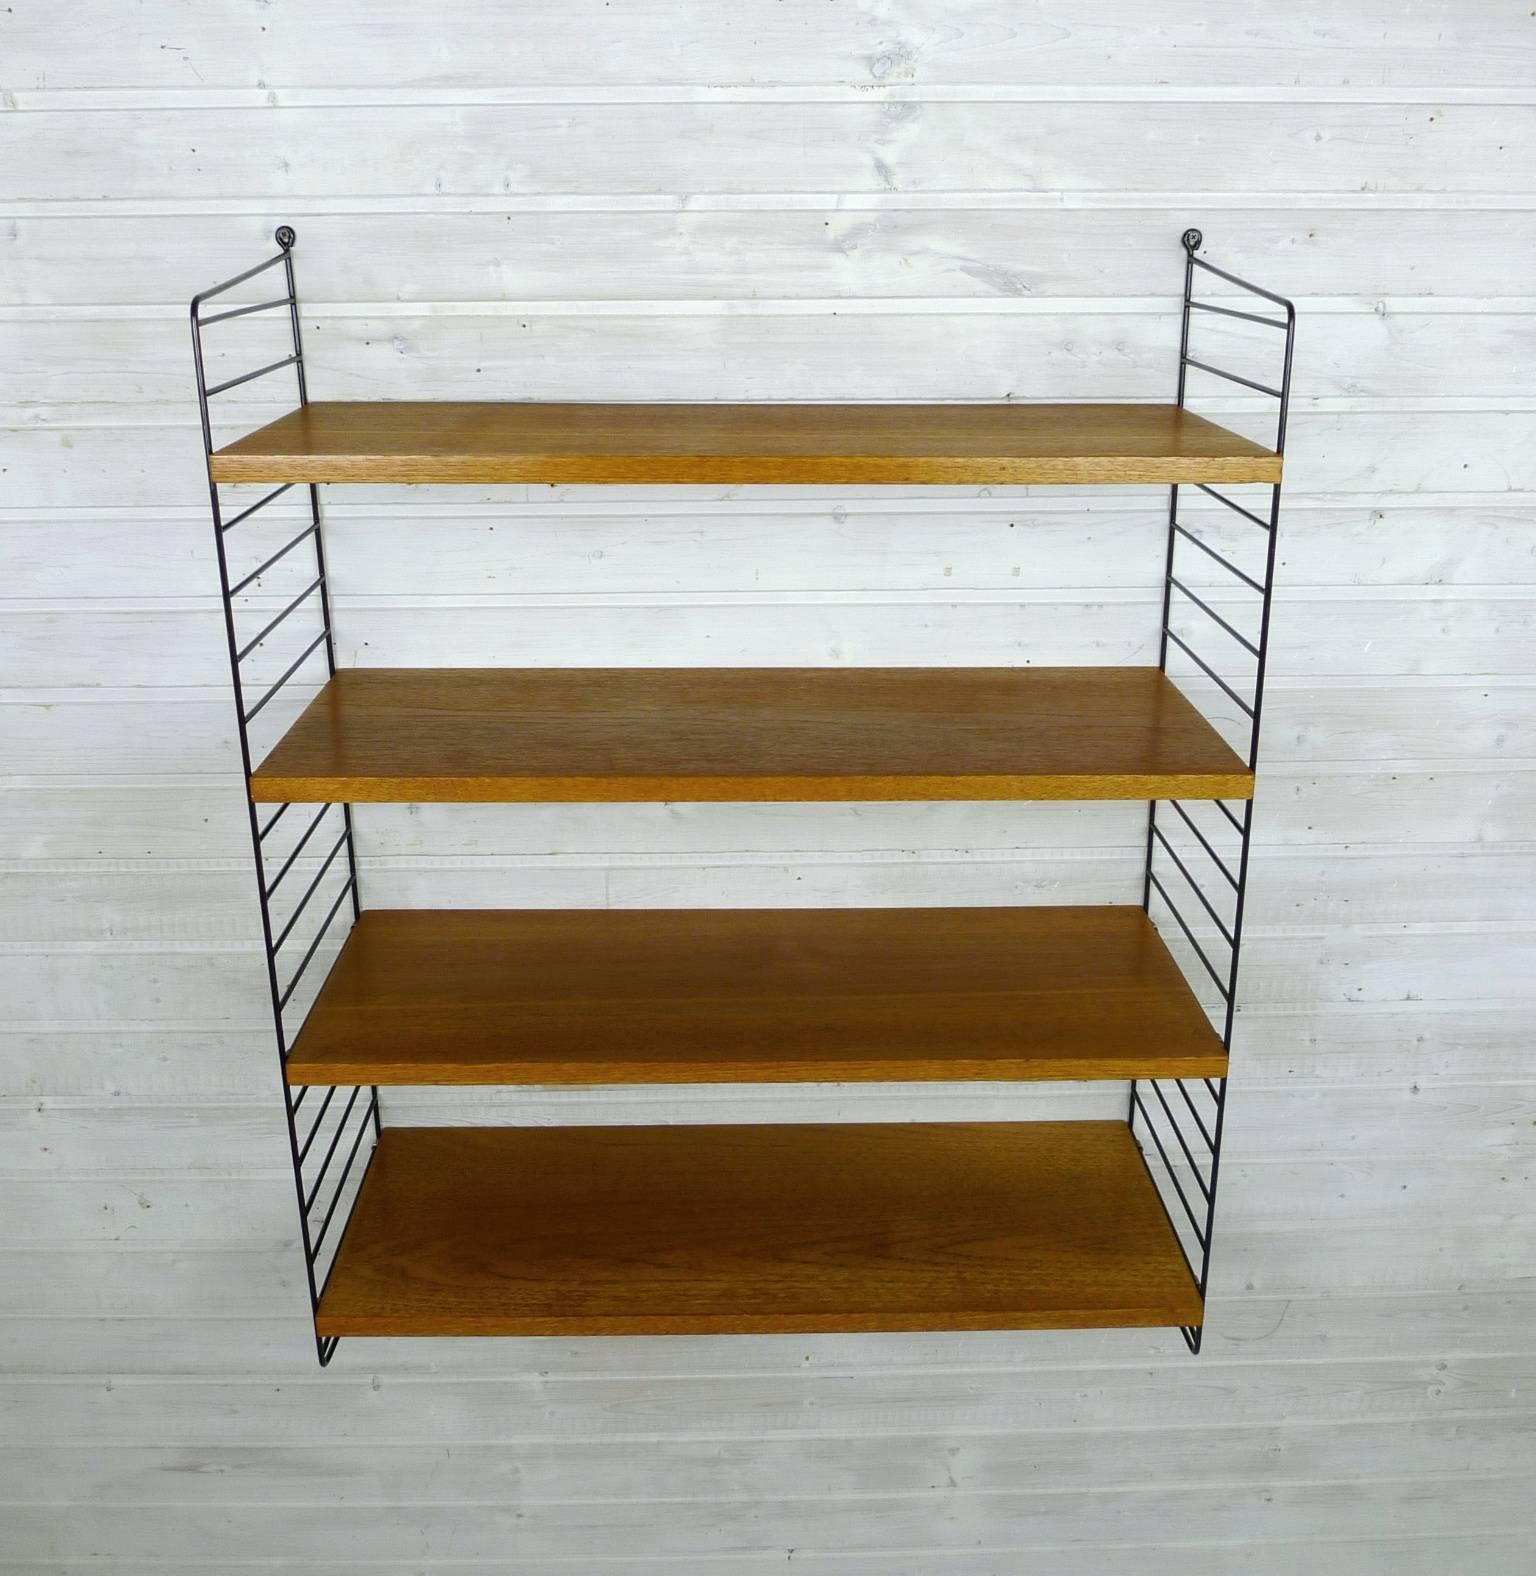 Nisse Strinning designed his famous shelf system in 1949. It was produced in his own company String Design AB in Sweden. 
This wall shelf consists of two black-coated ladders and four shelves in teak with a depth of 30 cm. The shelf is in a good